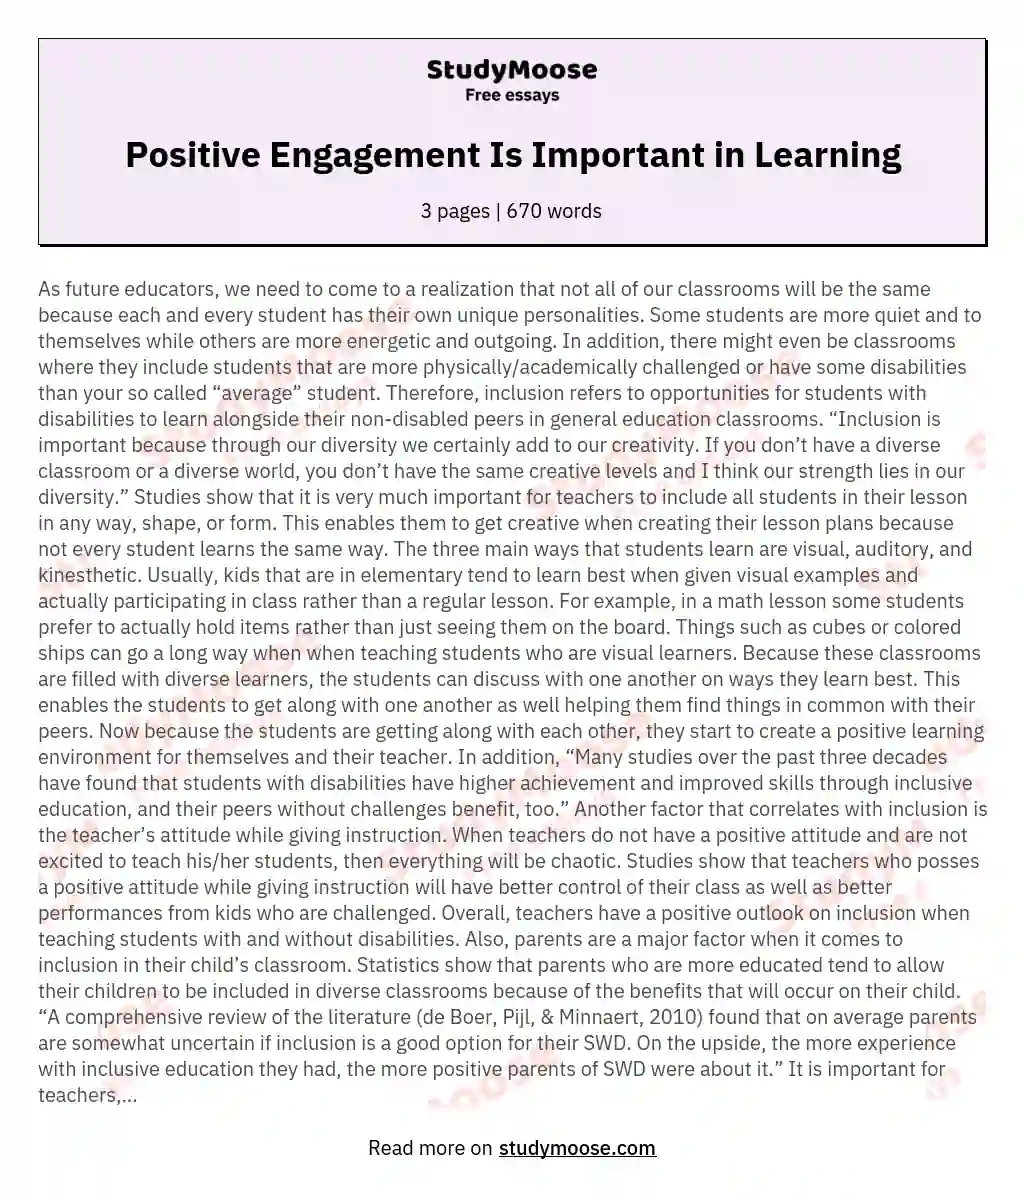 Positive Engagement Is Important in Learning essay